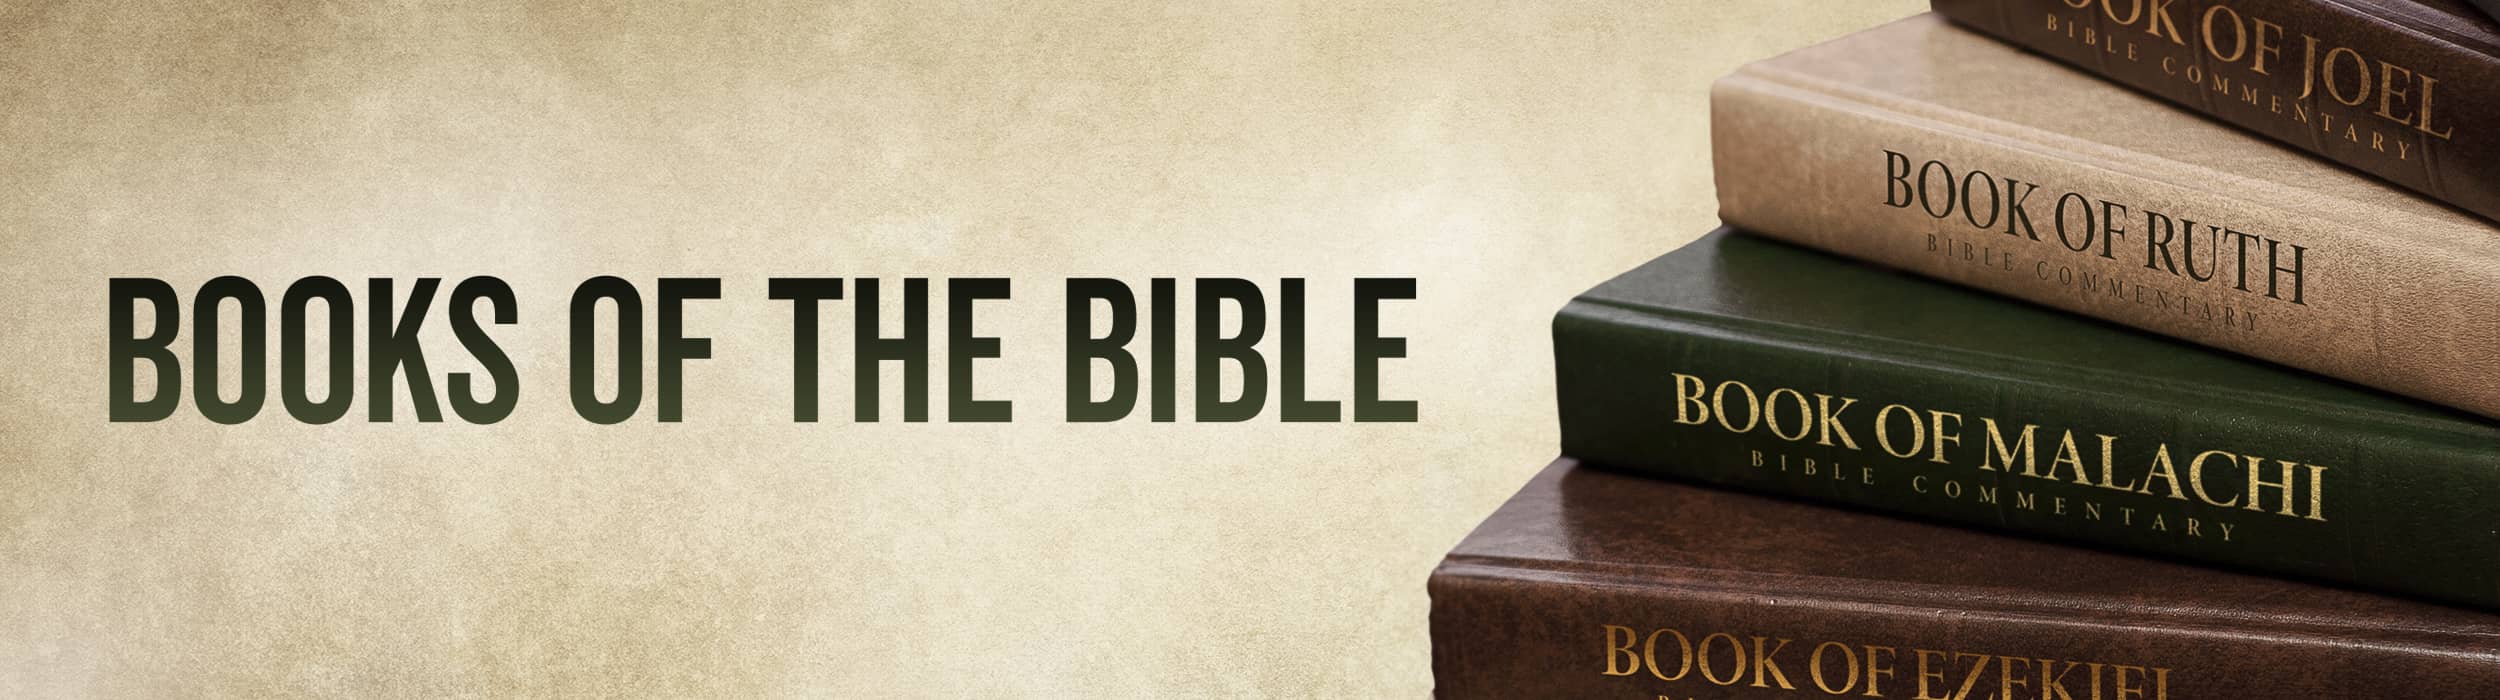 Online Bible Study Courses, Books of the Bible online courses